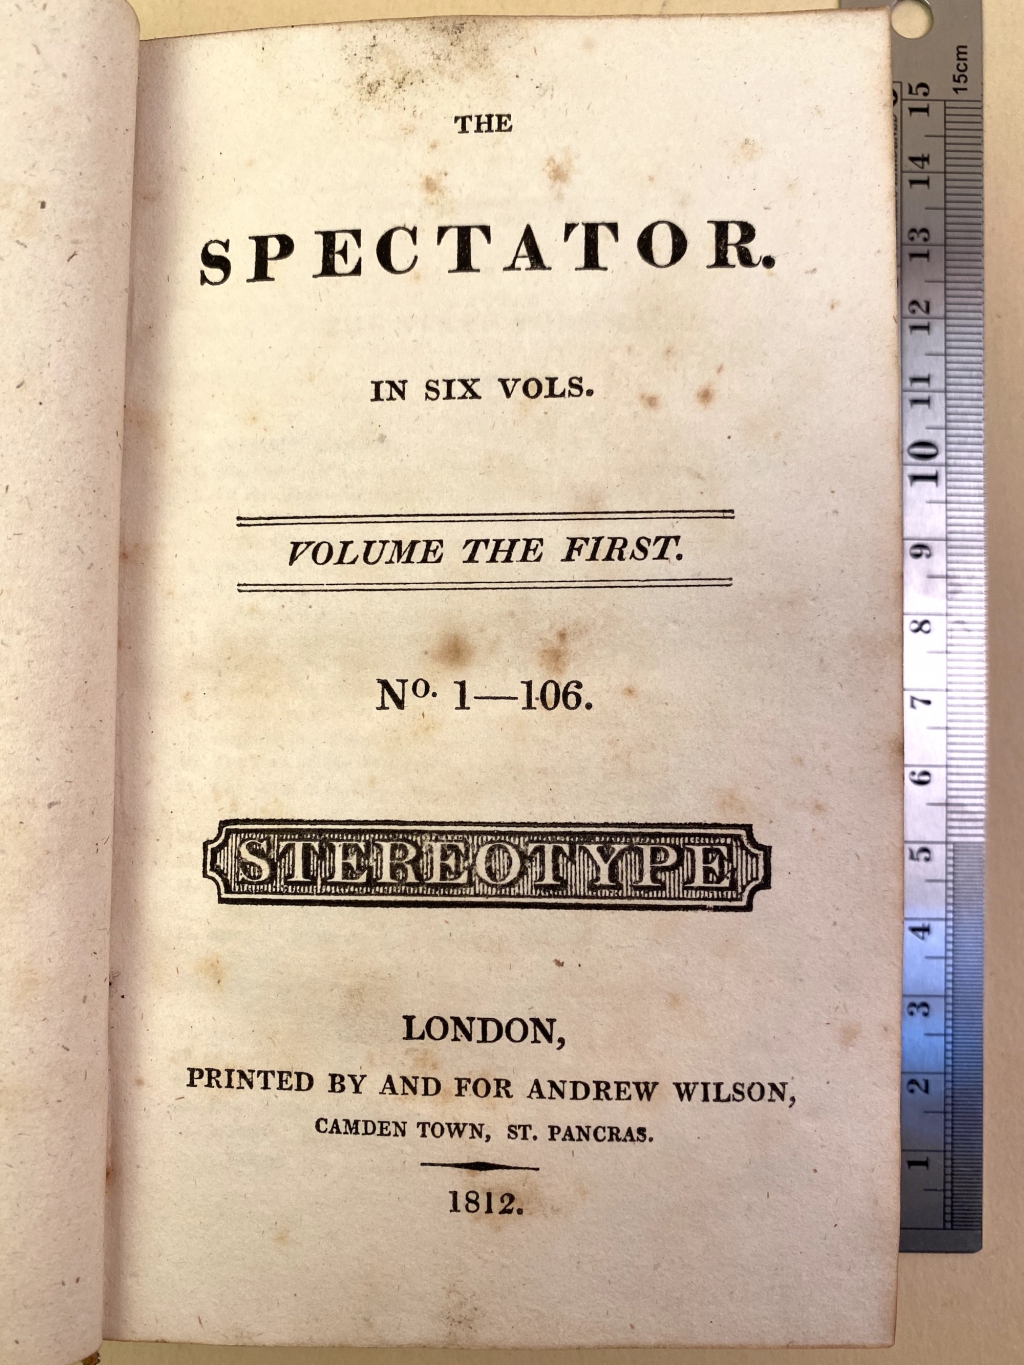 Wilson continued to promote the stereotype process, as if it was superior to ordinary printing from type. Here is such a promotion on the title page of his edition of The Spectator.